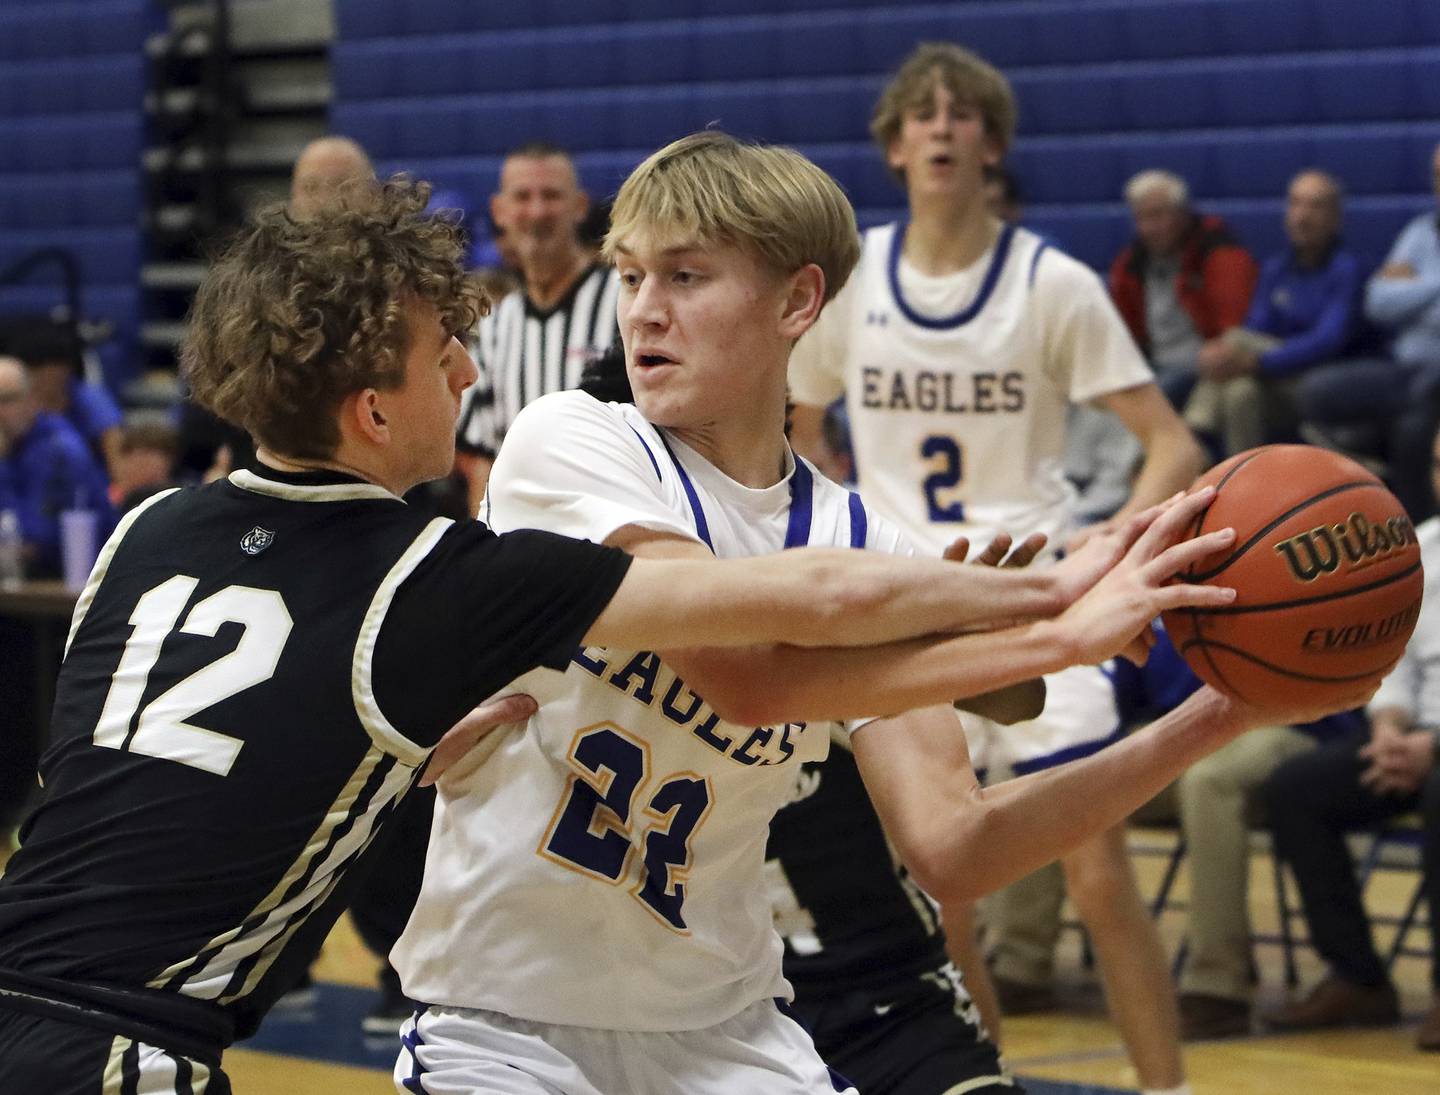 Sandburg's Paulius Mizeras (22) makes a move to the basket as Oak Forest's Owen Otstott (12) defends during a nonconference game in Orland Park on Friday, Dec. 16, 2022.